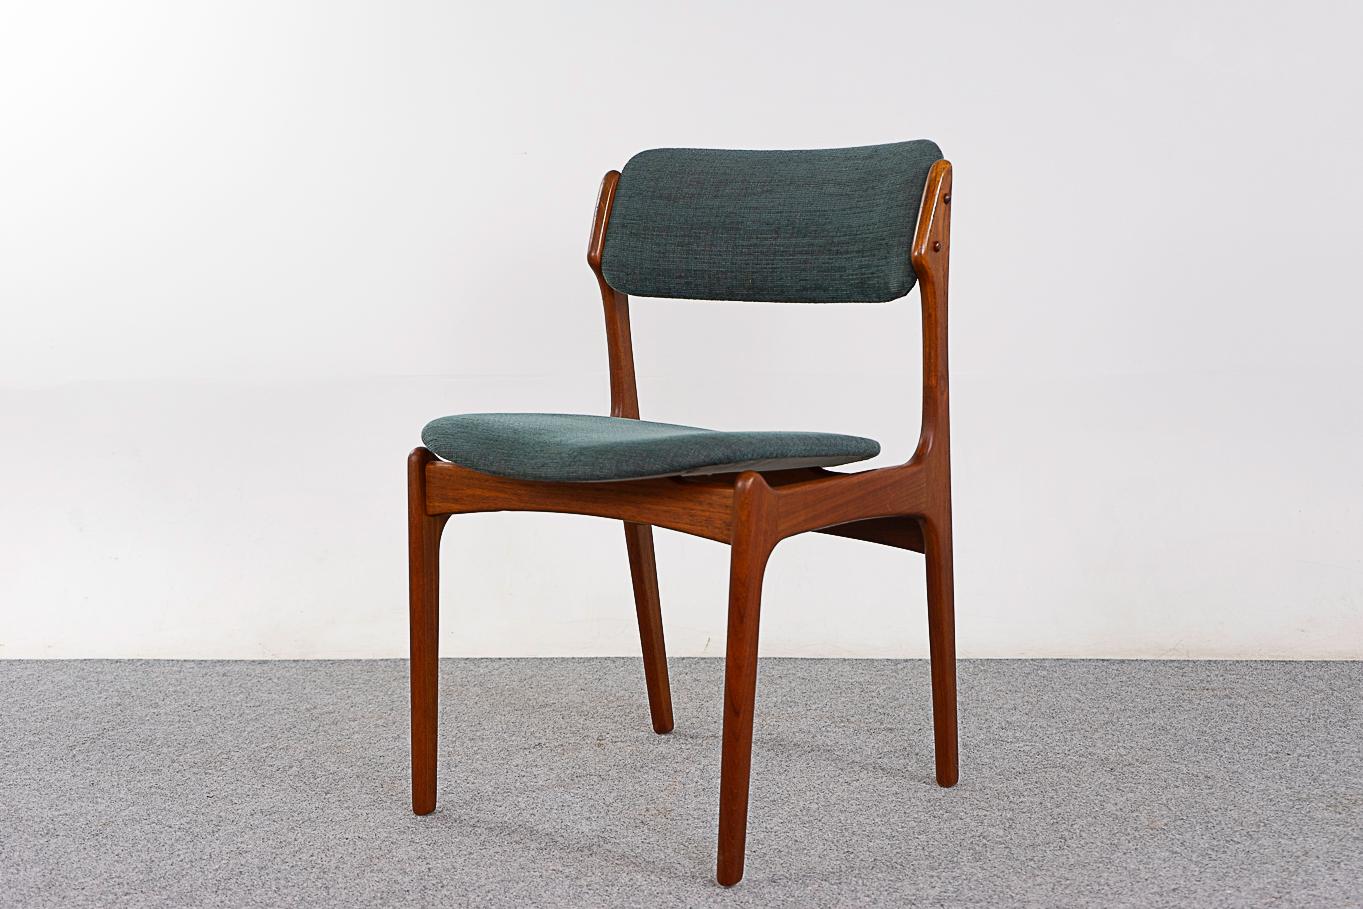 Teak Model 49 dining chairs by Erik Buch, circa 1960's. Beautifully curved backrests and generous seat design provide support and comfort. Solid wood frame with cross braces for added stability and support. Floating seat design adds an air of